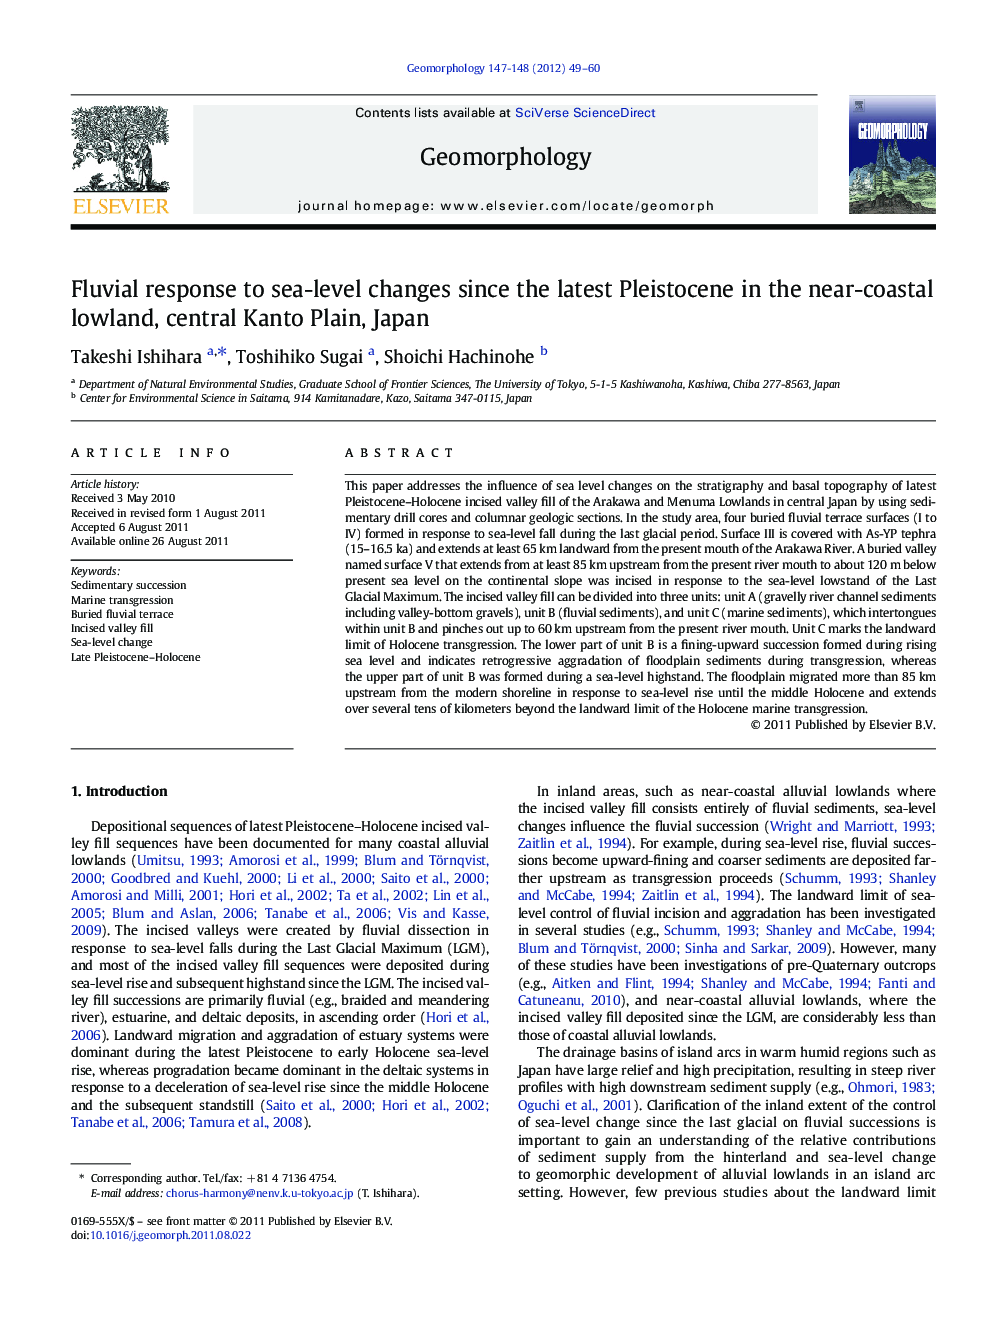 Fluvial response to sea-level changes since the latest Pleistocene in the near-coastal lowland, central Kanto Plain, Japan